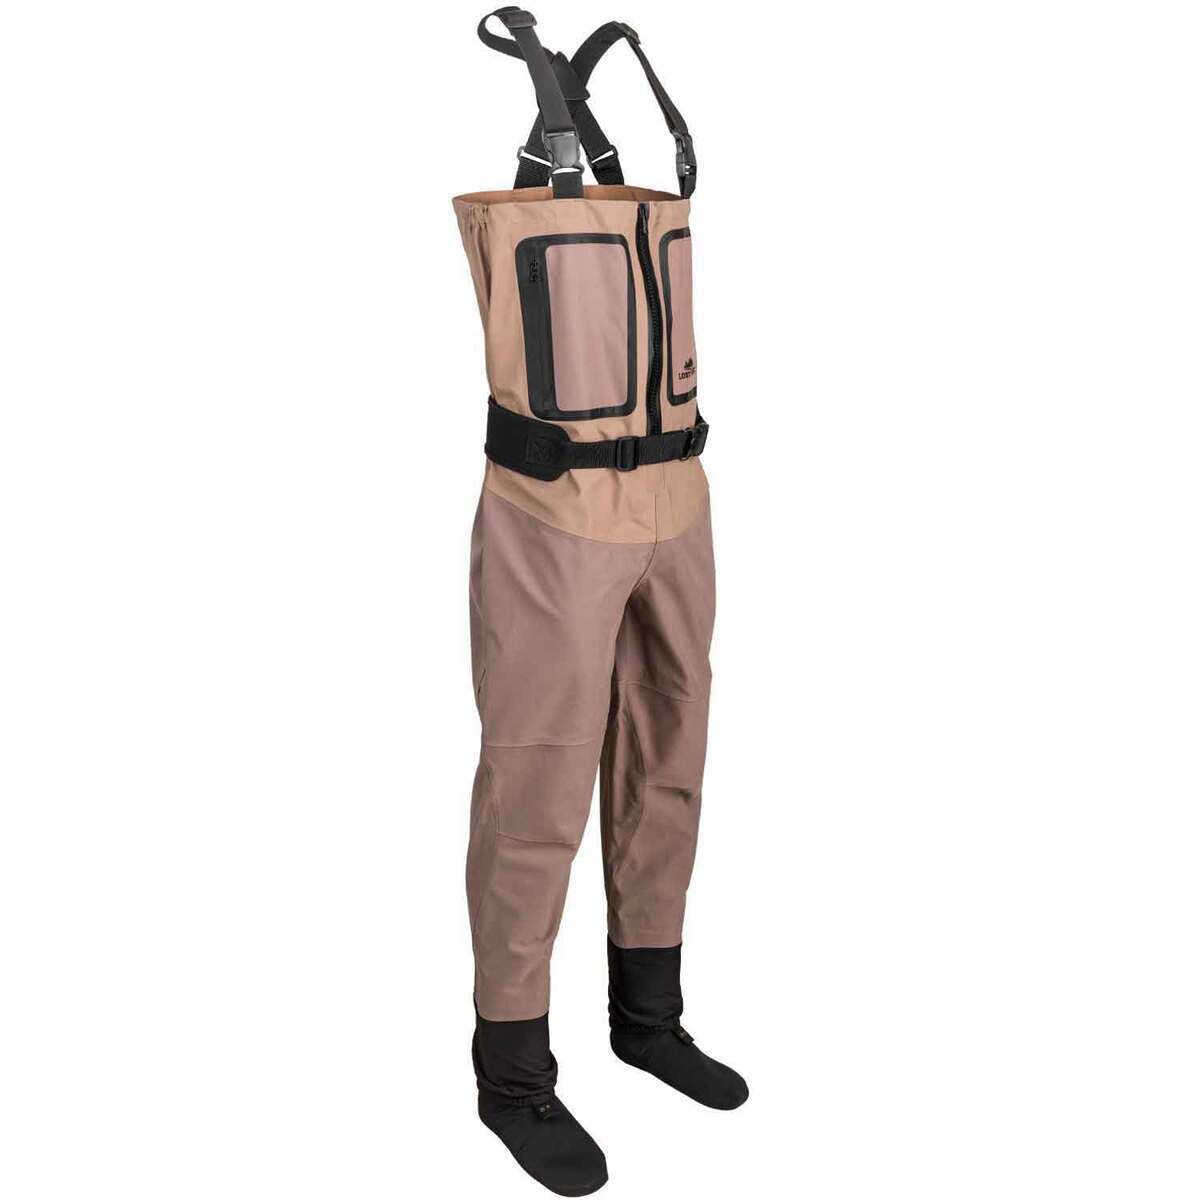 Fly Fishing Hero Chest Waders for Men with Boots Hunting Waders